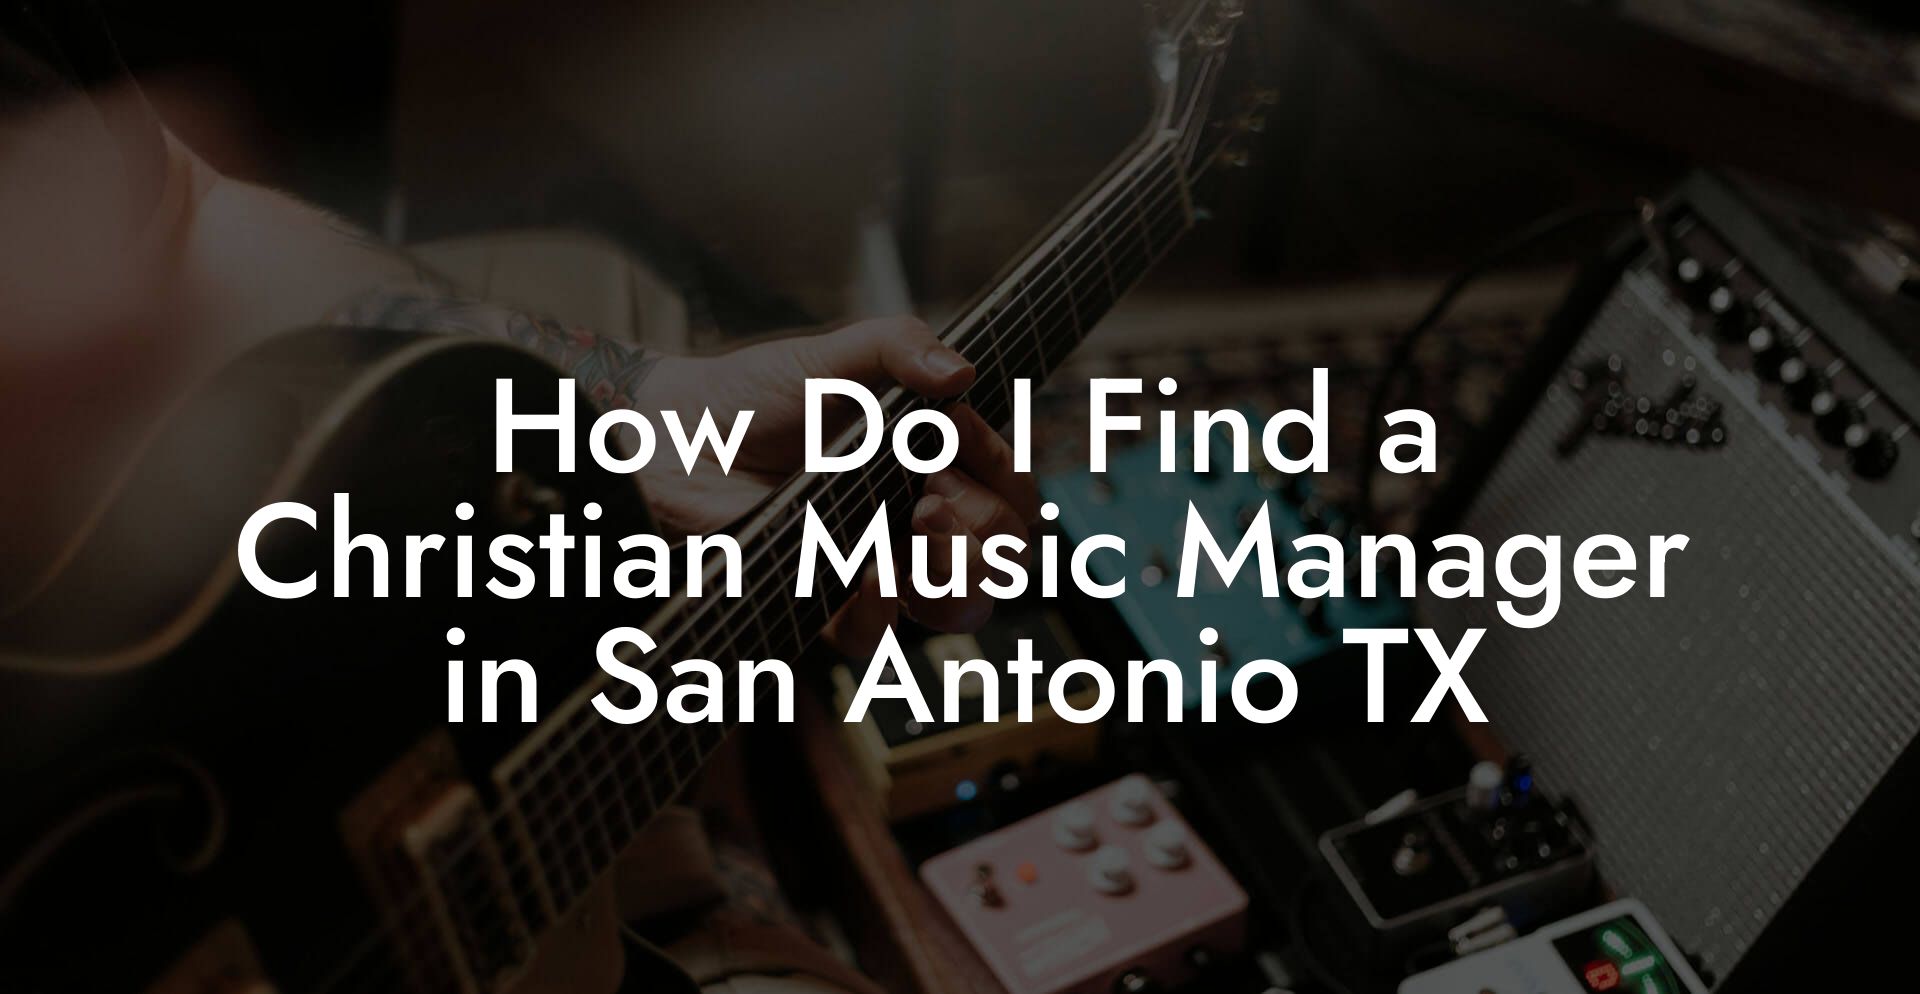 How Do I Find a Christian Music Manager in San Antonio TX